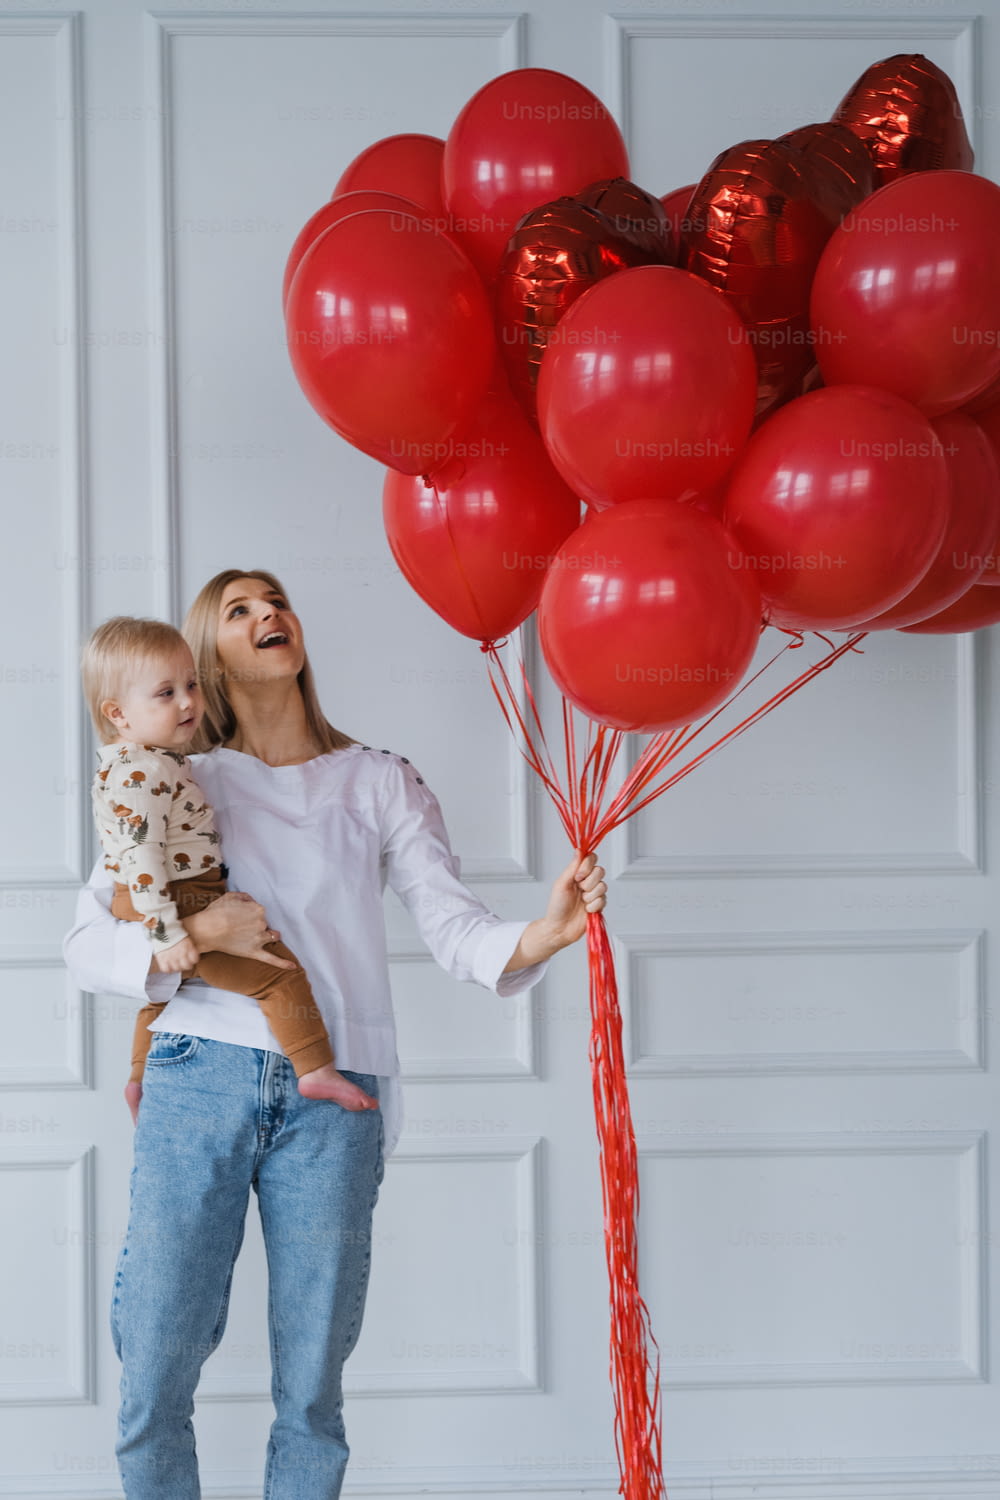 a woman holding a baby and a bunch of red balloons